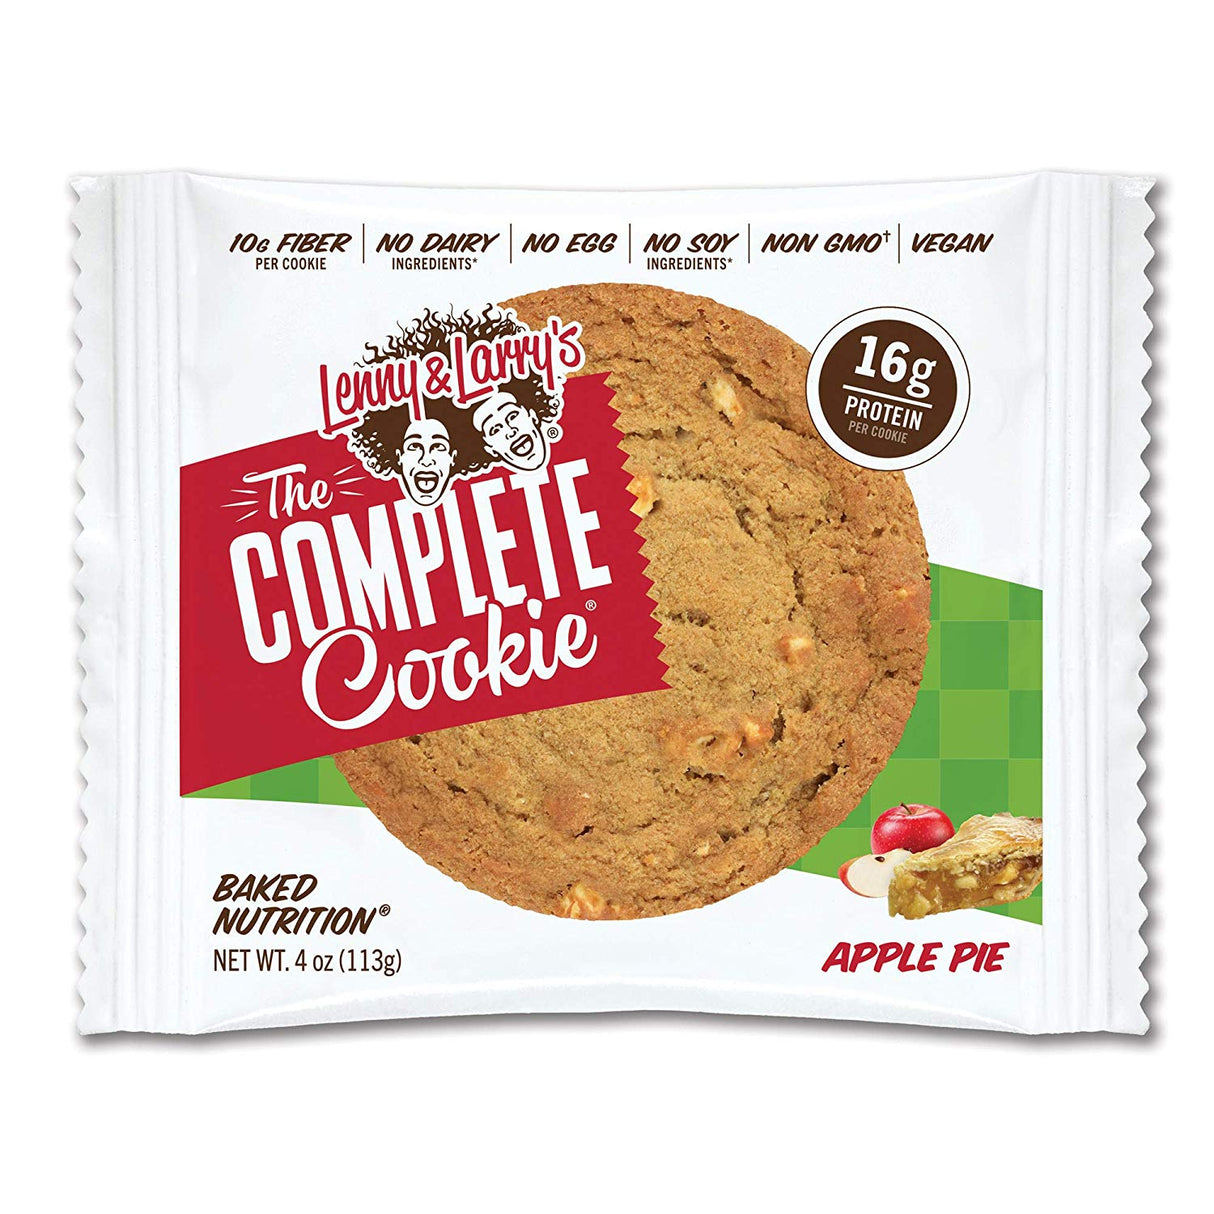 The Complete Cookie 12 x 113g Apple Pie